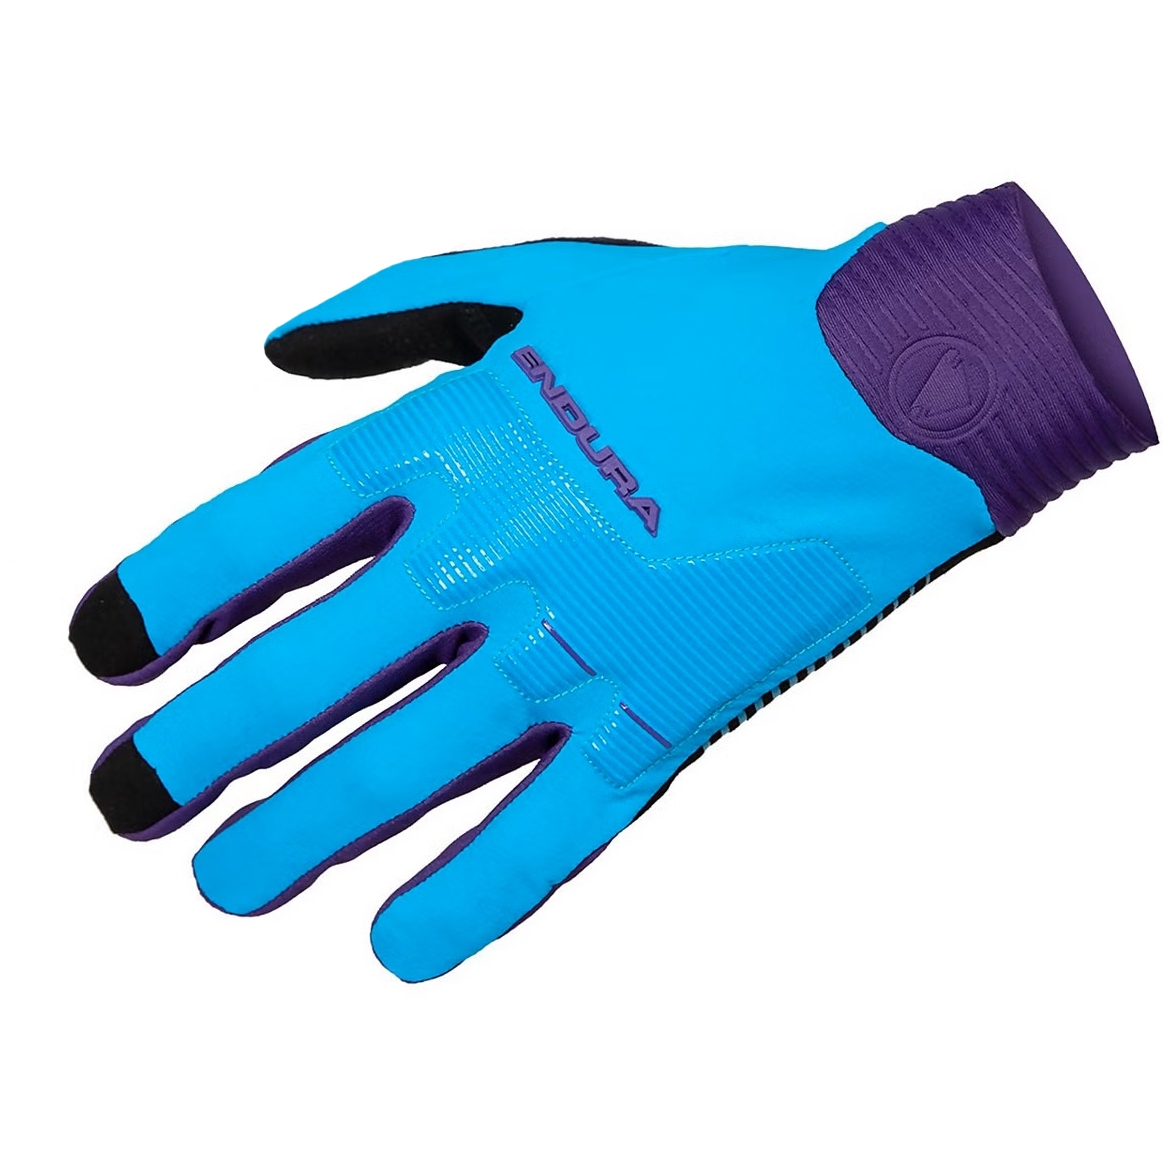 Picture of Endura MT500 D3O® Gloves - electric blue